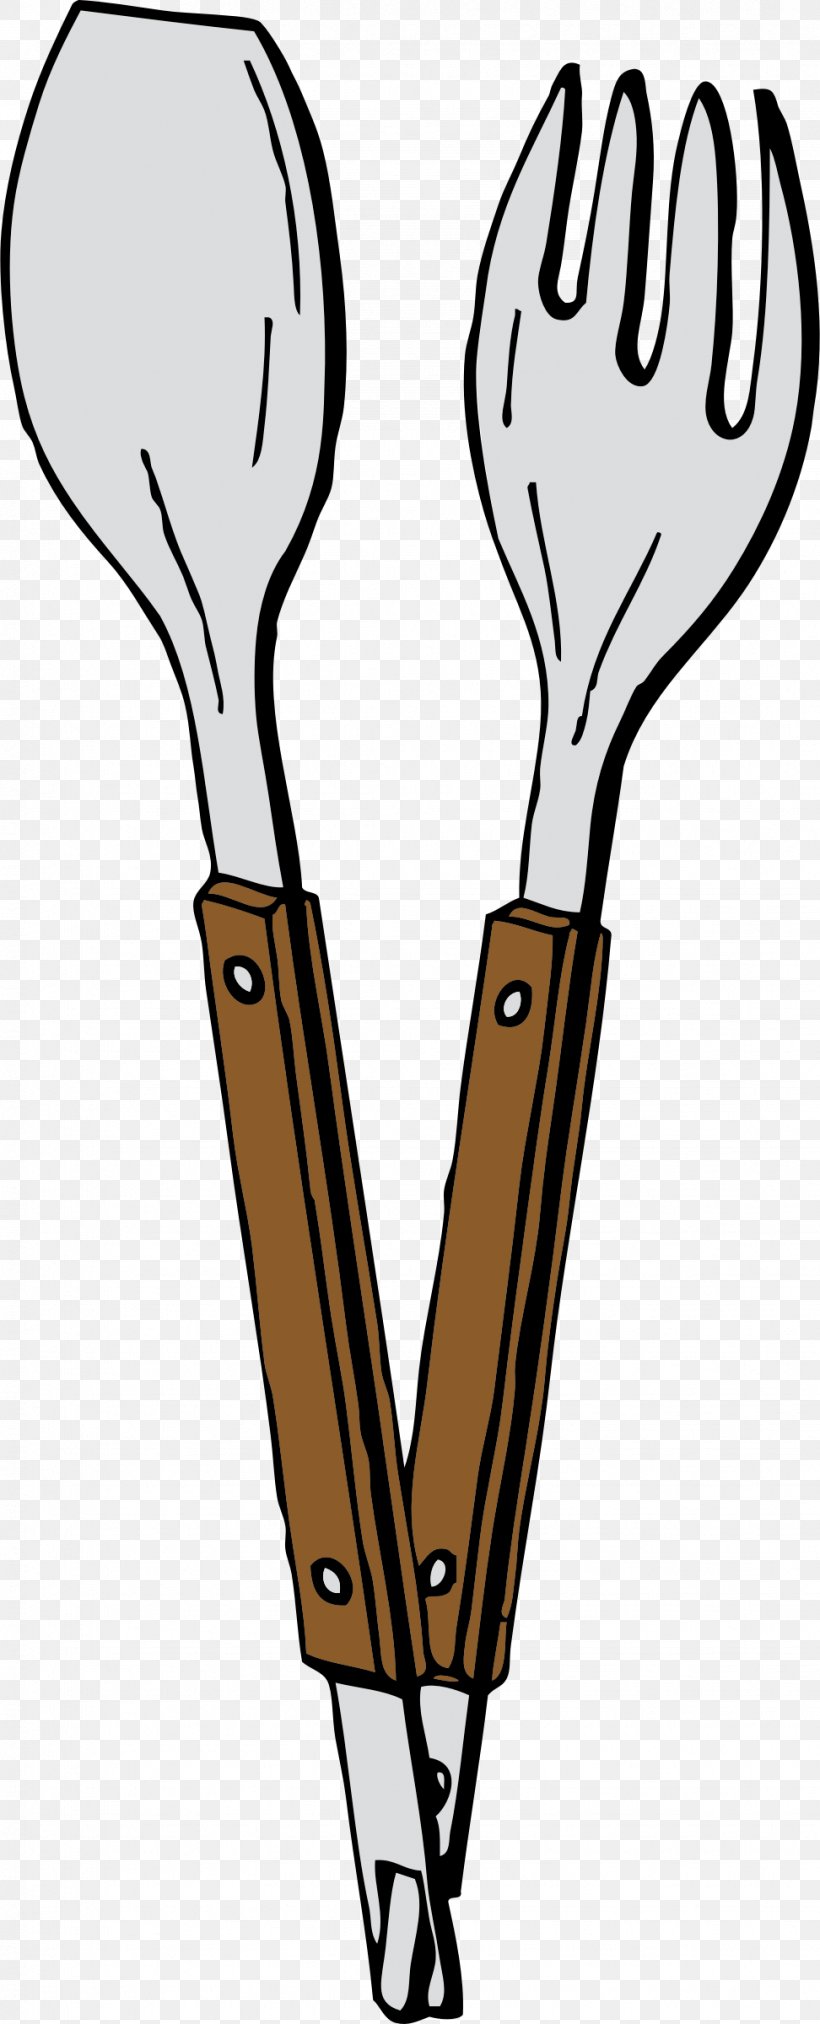 Tongs Tool Kitchen Utensil Clip Art, PNG, 972x2400px, Tongs, Cartoon, Hand, Kitchen, Kitchen Utensil Download Free